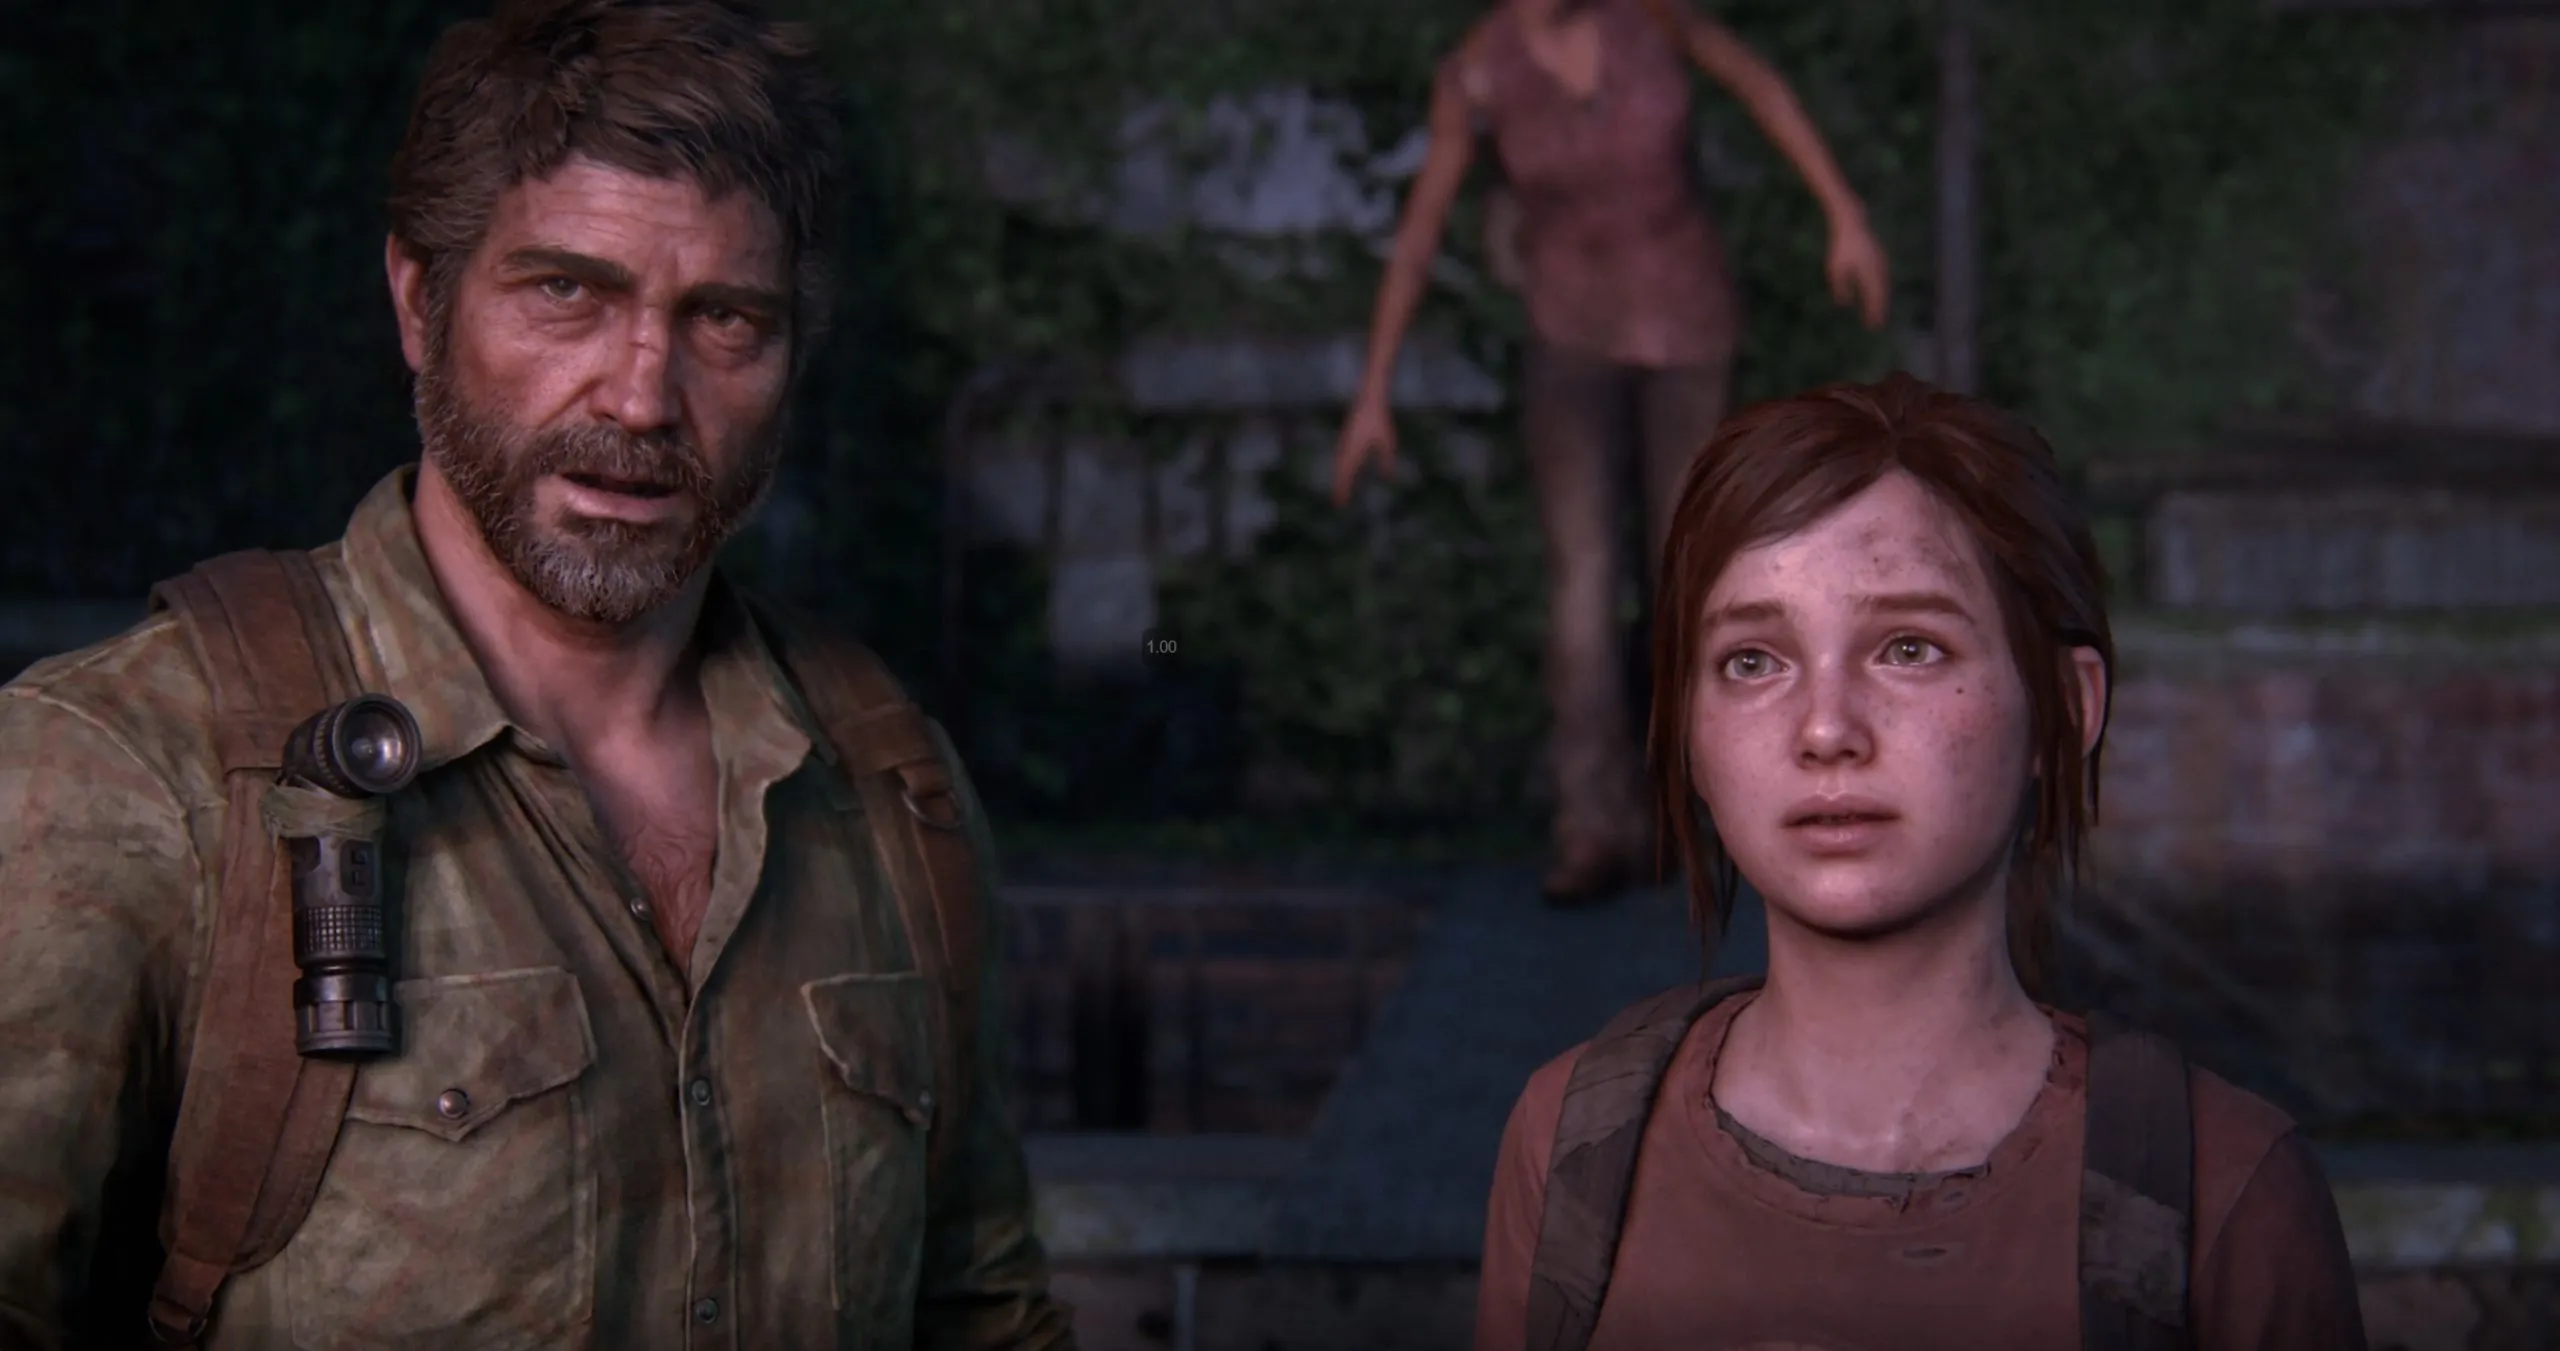 The Last of Us remake is coming to PS5 this year, PC in development